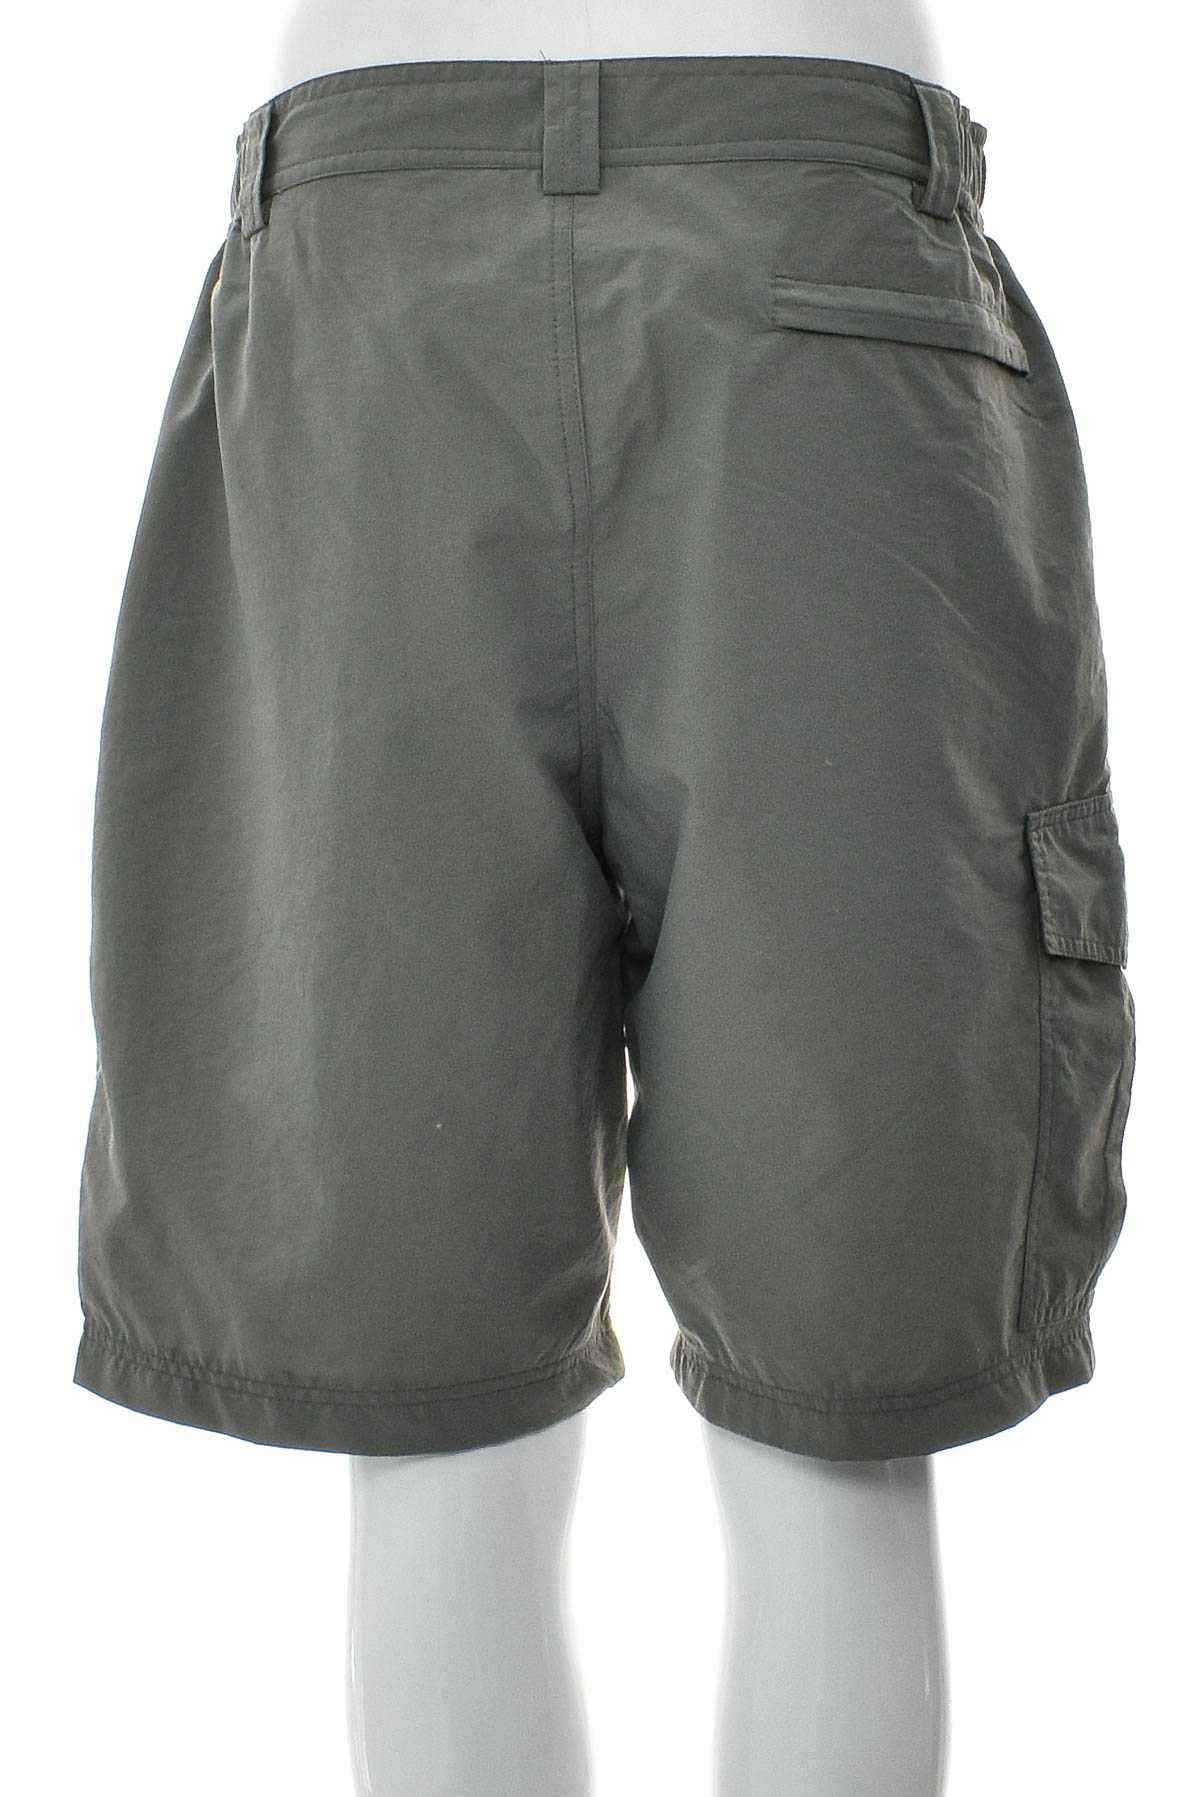 Men's shorts - OUTDOOR TIME - 1